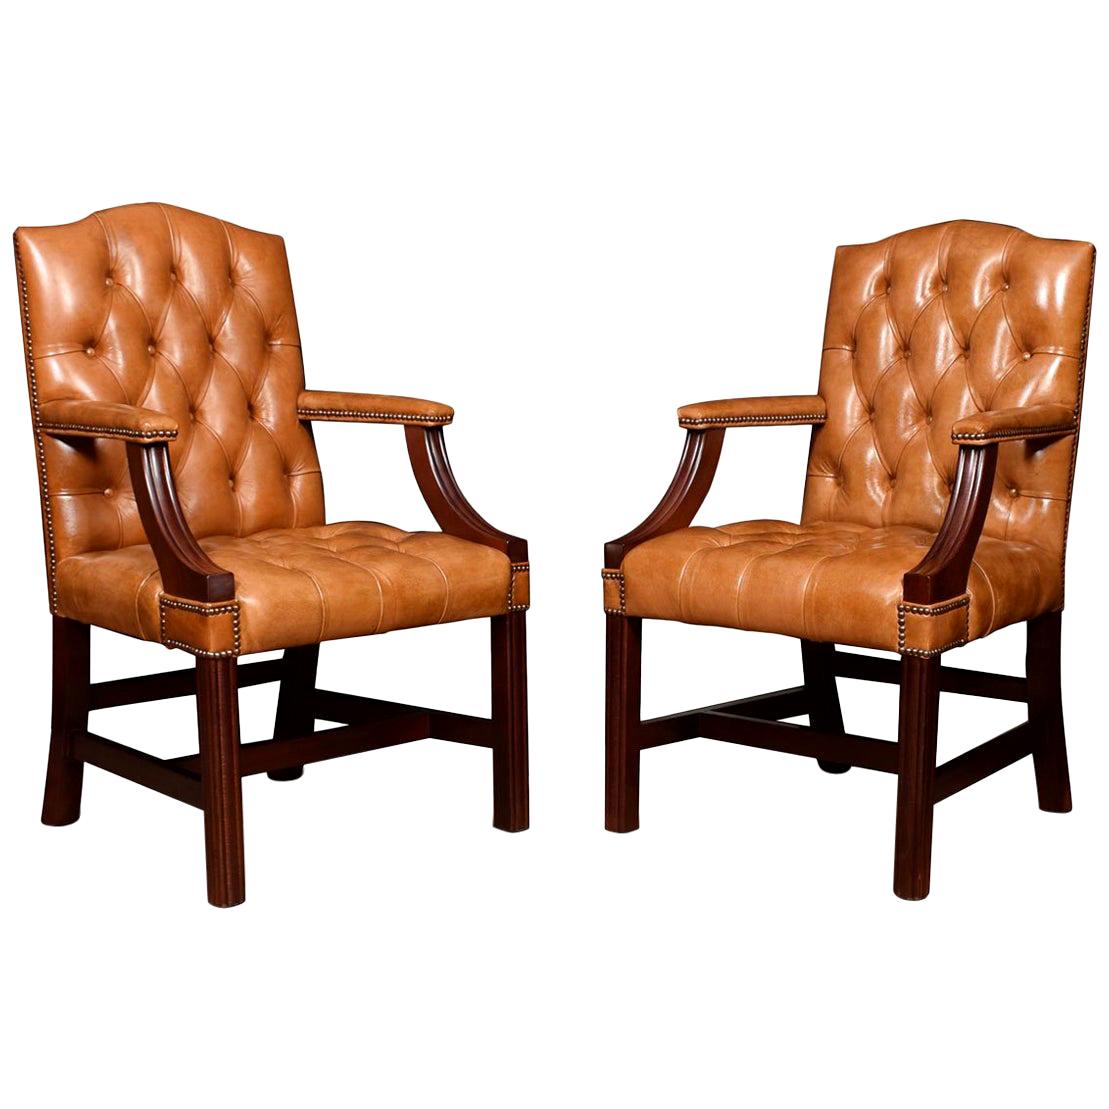 Pair of Georgian Style Leather Gainsborough Library Chairs